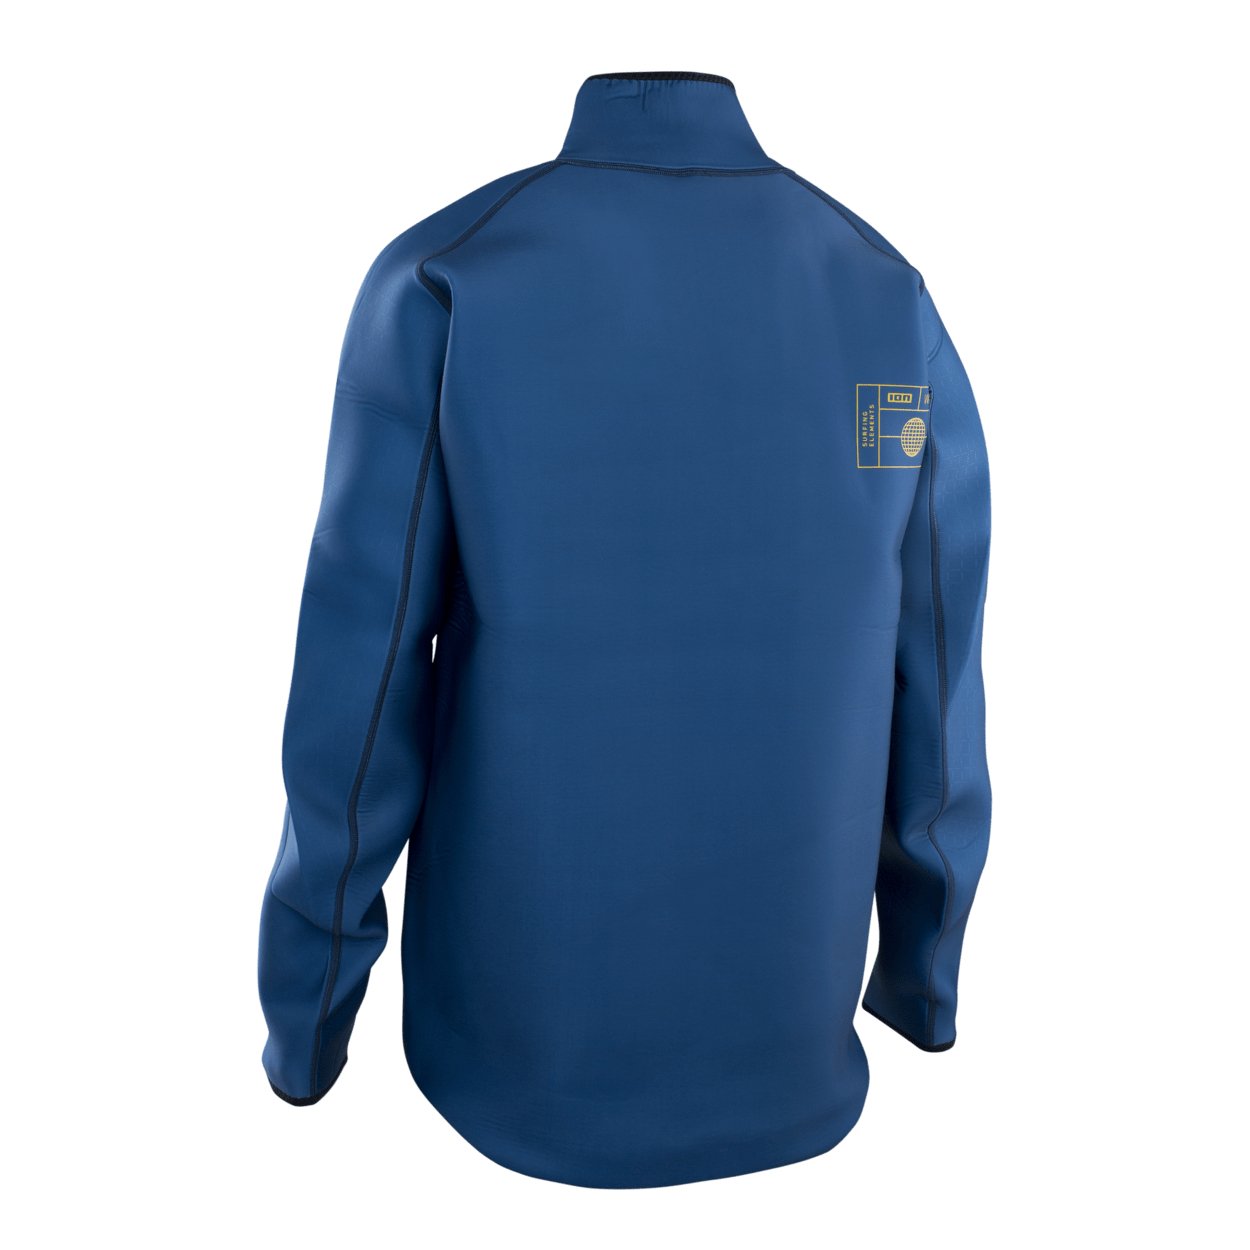 ION Neo Cruise Jacket men 2023 - Worthing Watersports - 9010583118611 - Tops - ION Water